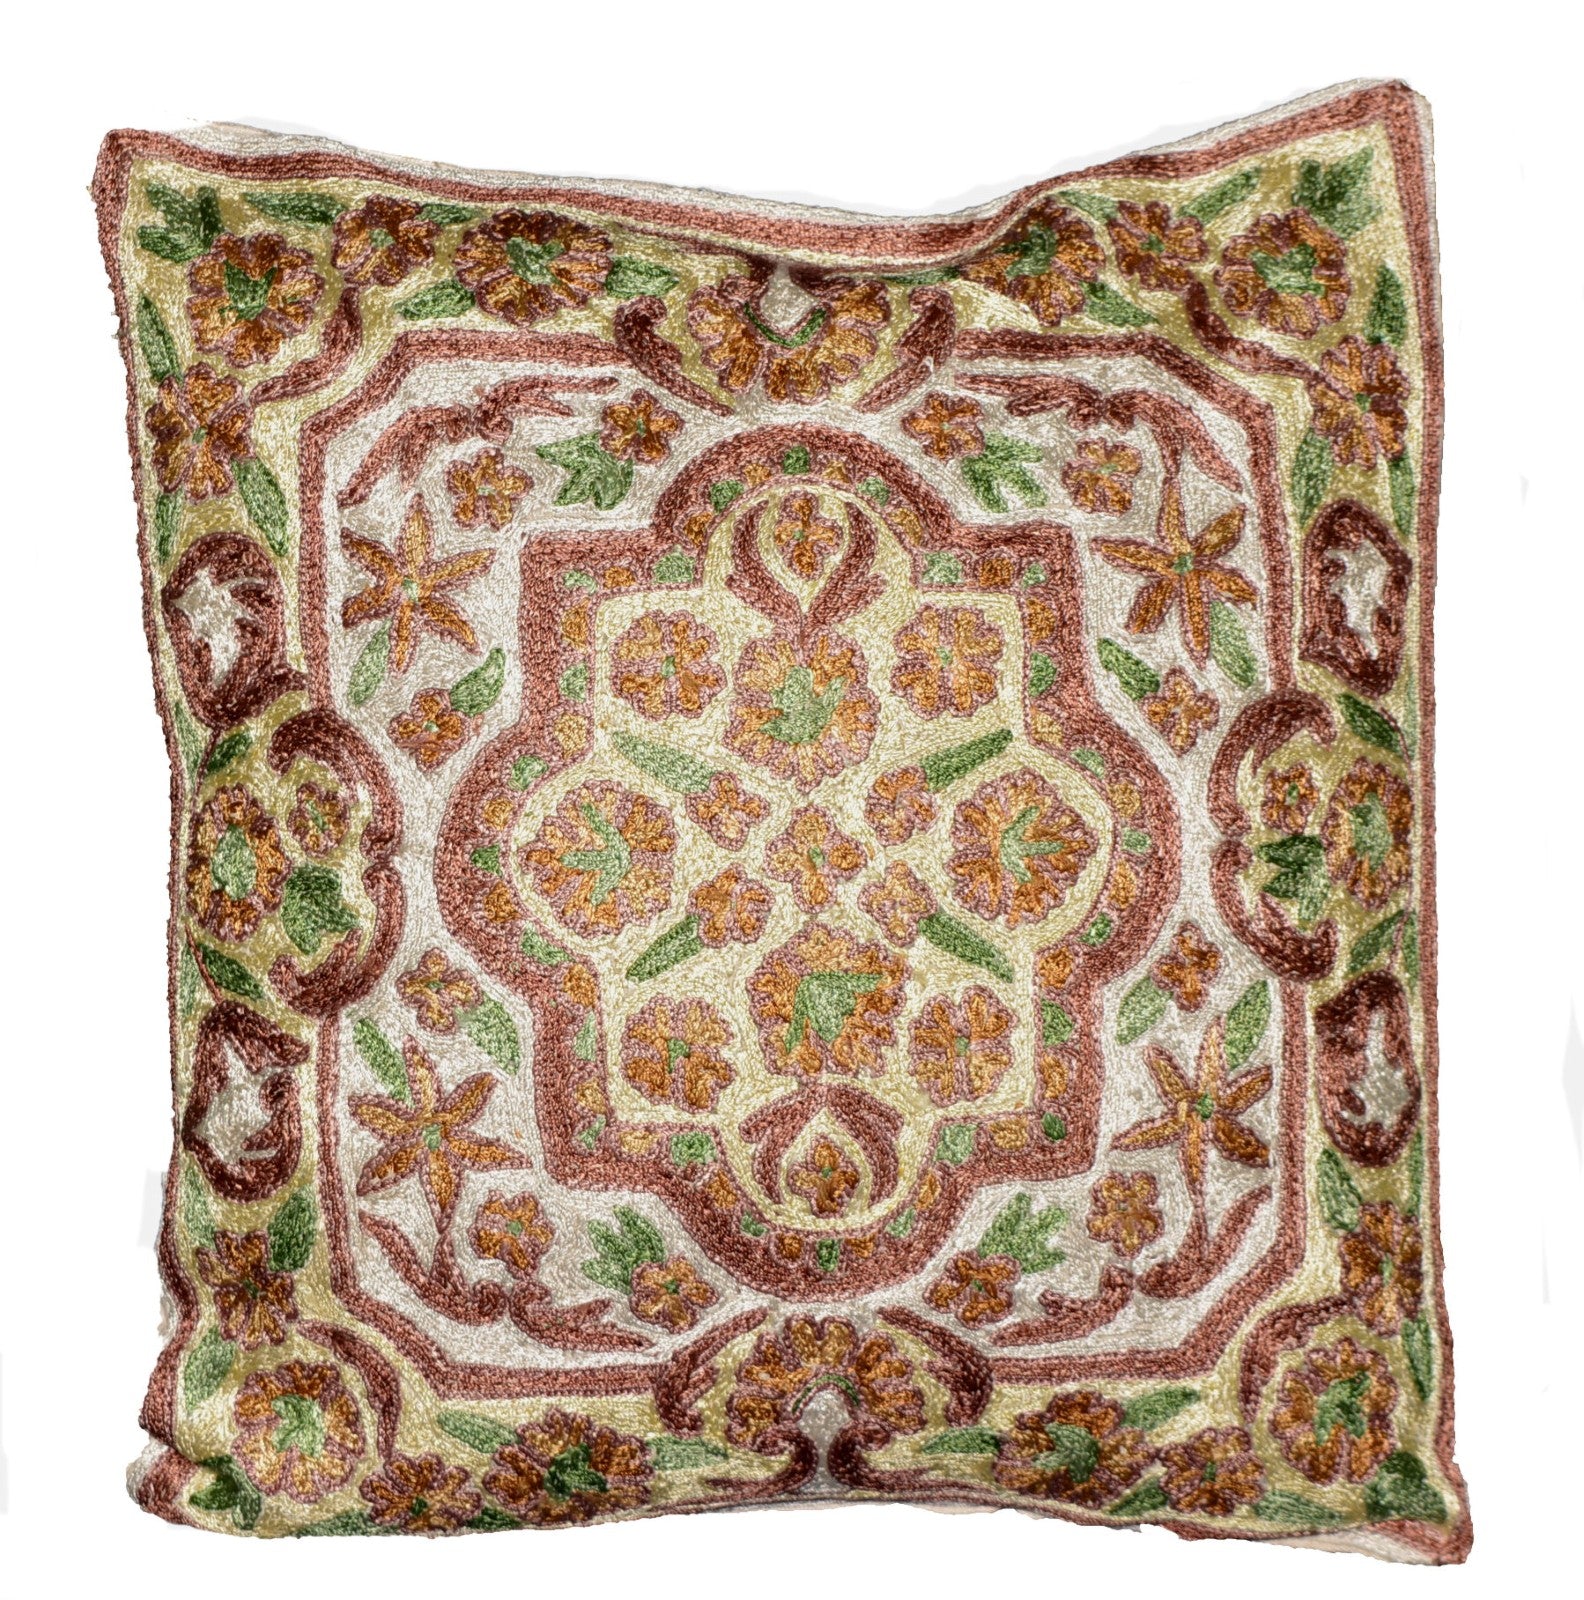 Crewel Silk Embroidered Cushion Throw Pillow Cover, Multicolor #CW2006